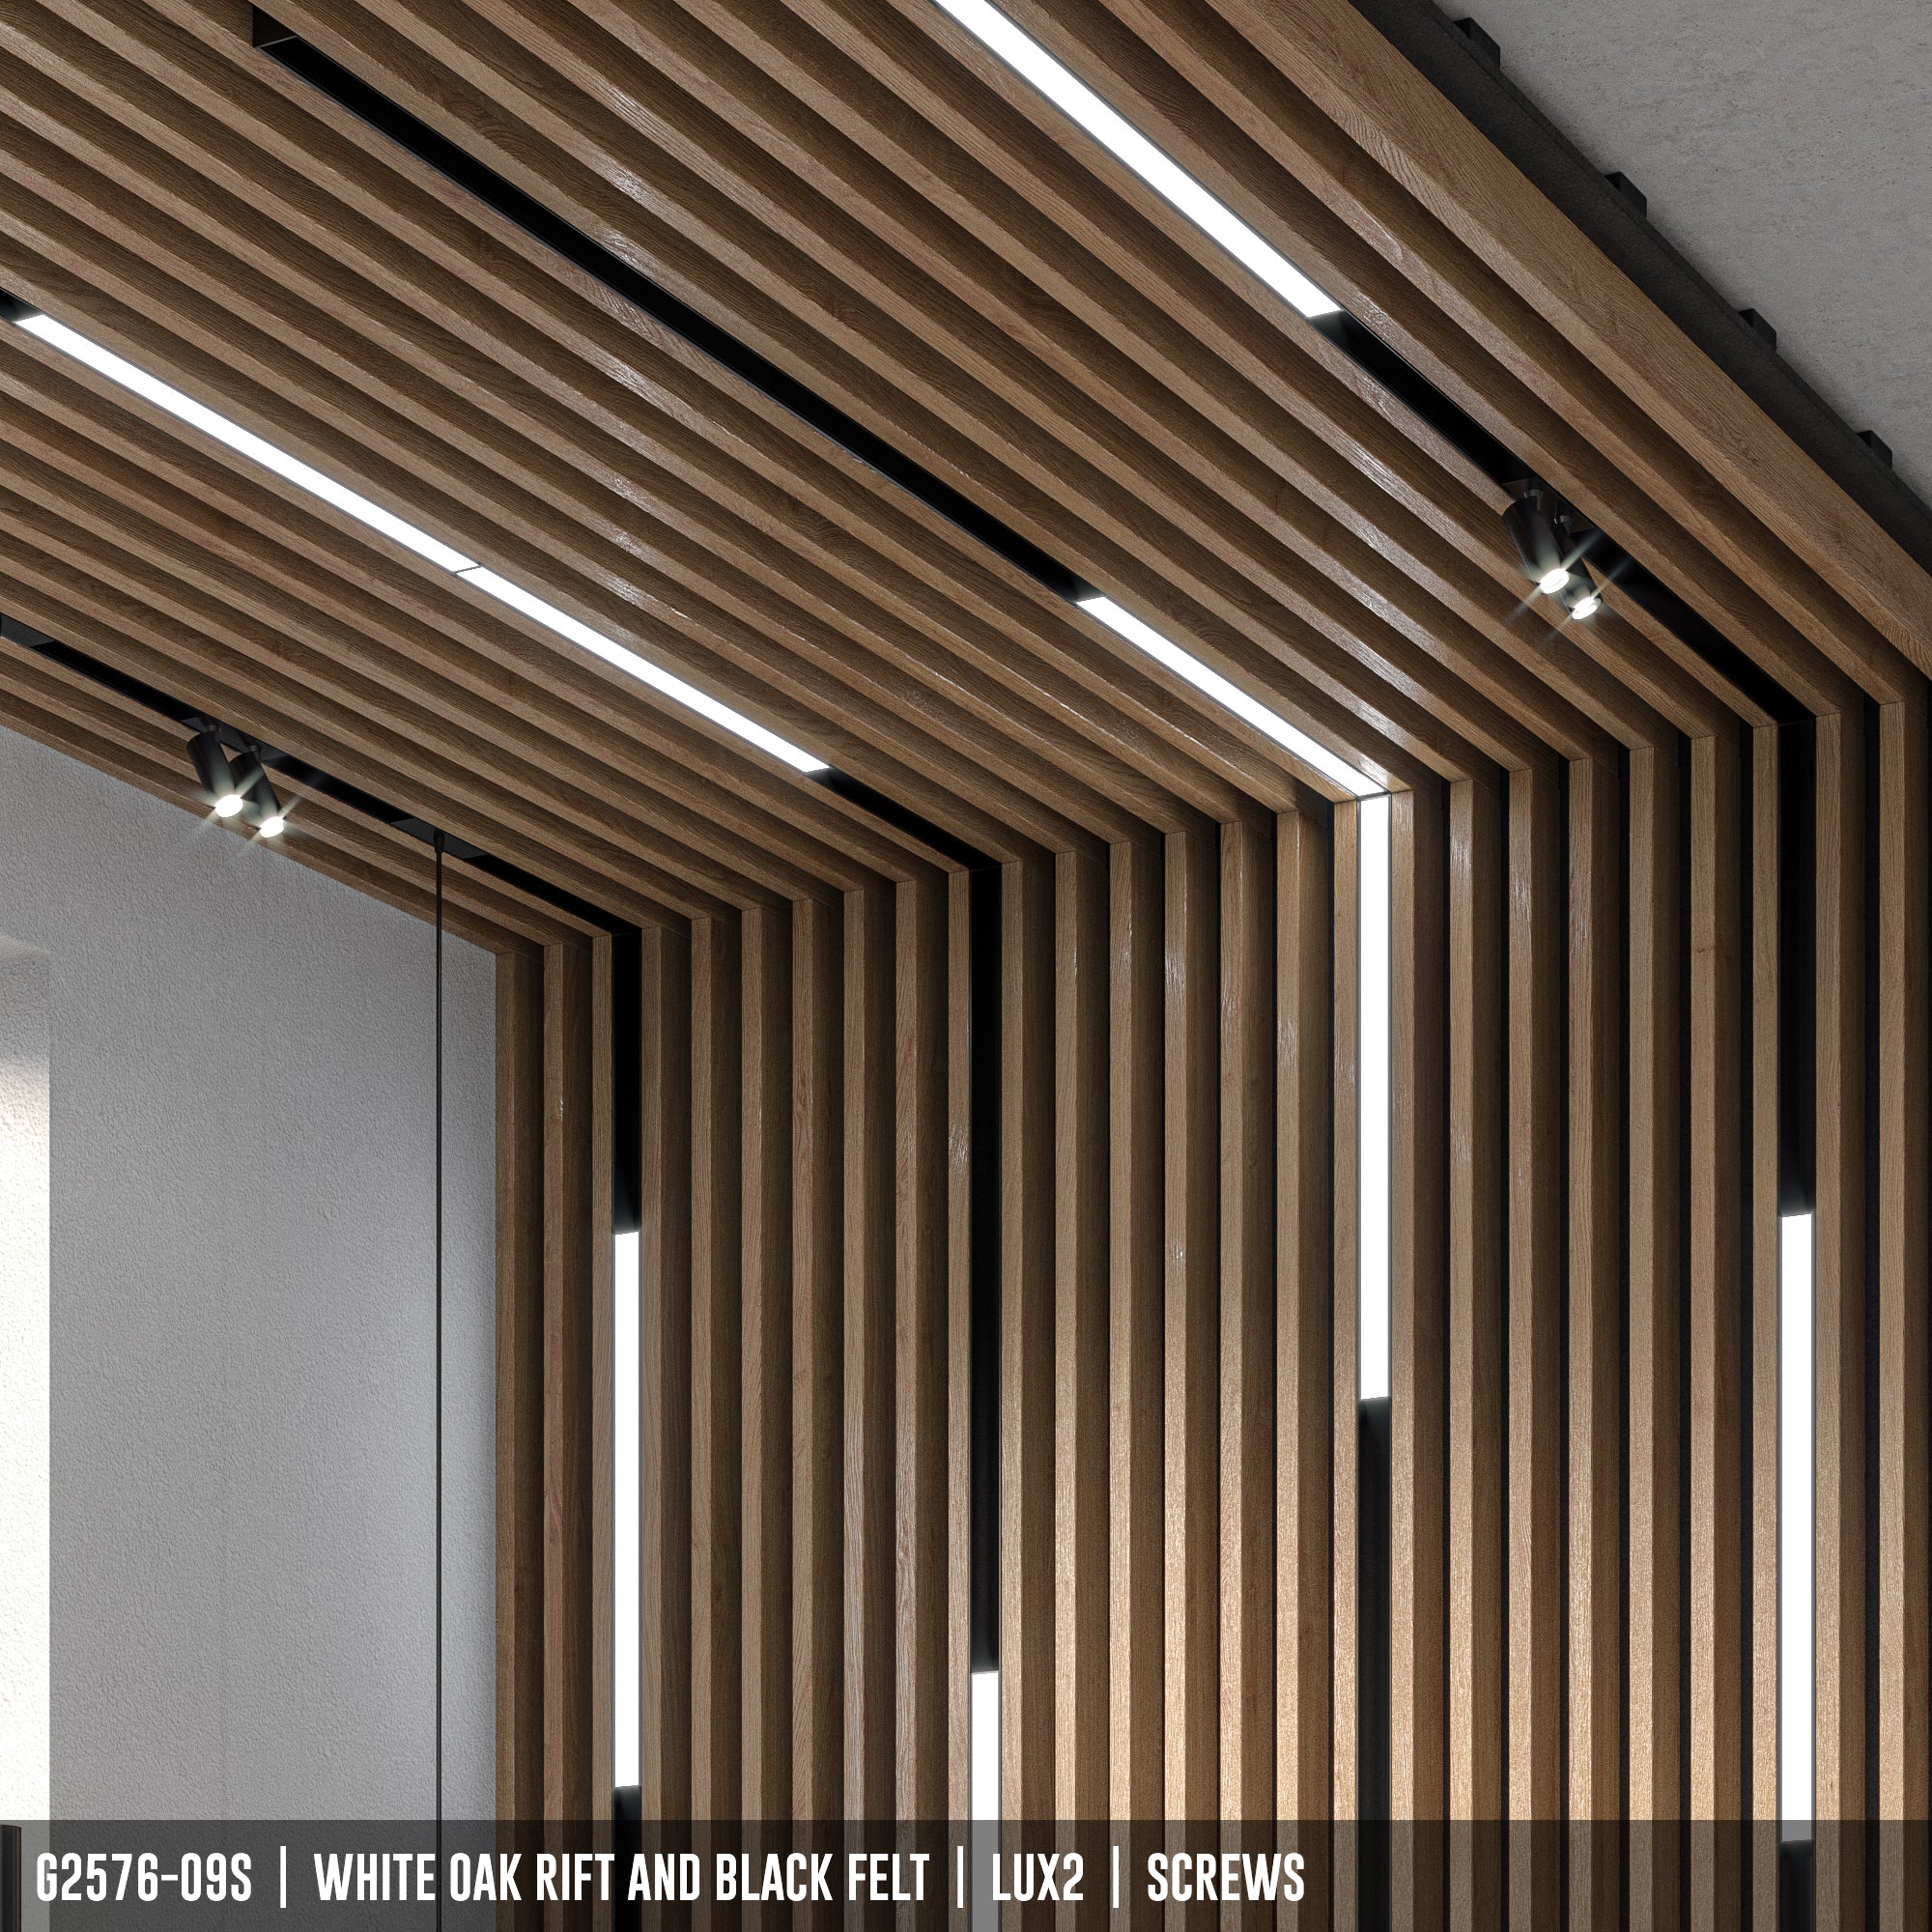 G2576-09S | Acoustical Linear Wood Panel with LUX2 Lighting (optional)